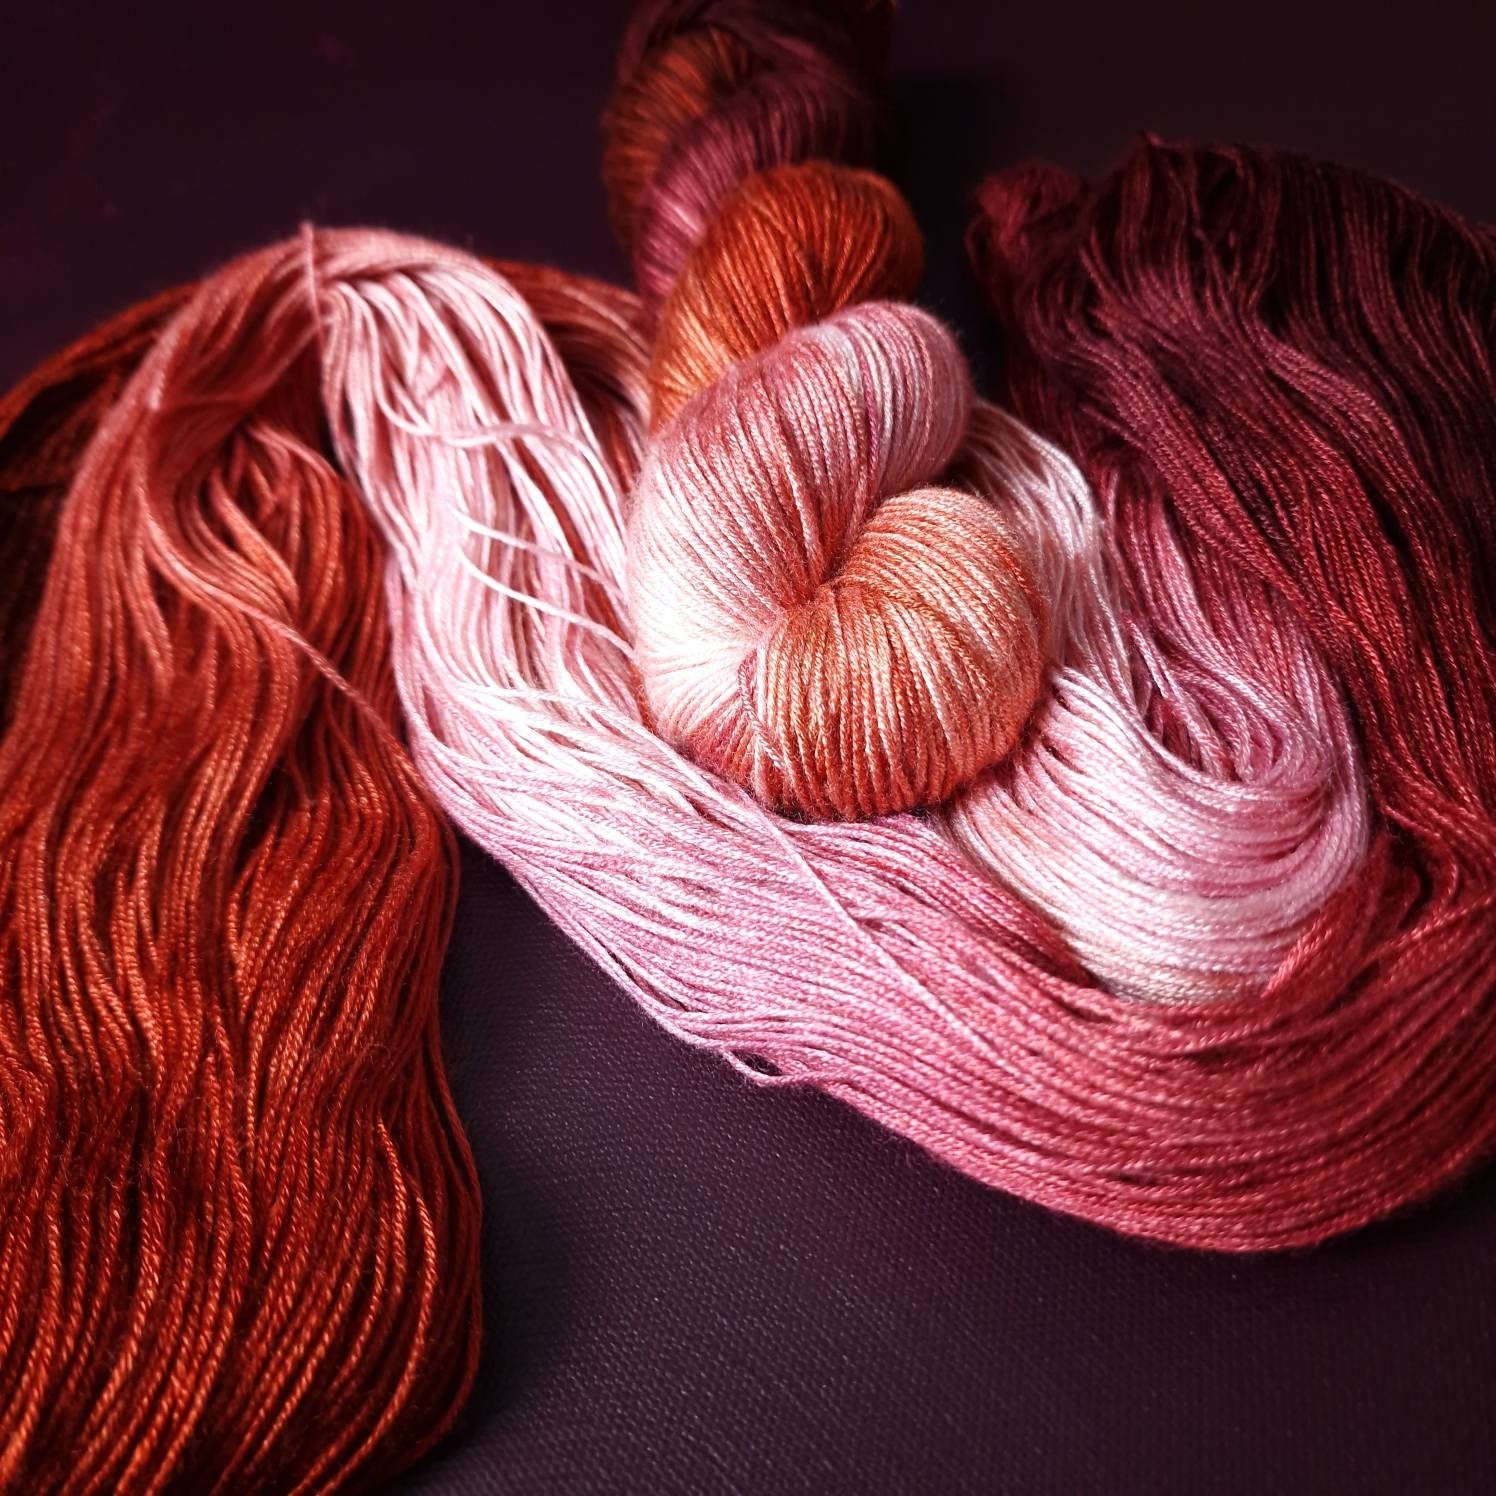 Hand dyed yarn ~Spicy Salmon ***Dyed to order~ fingering weight tencel, bamboo, linen yarn or light DK mercerized cotton